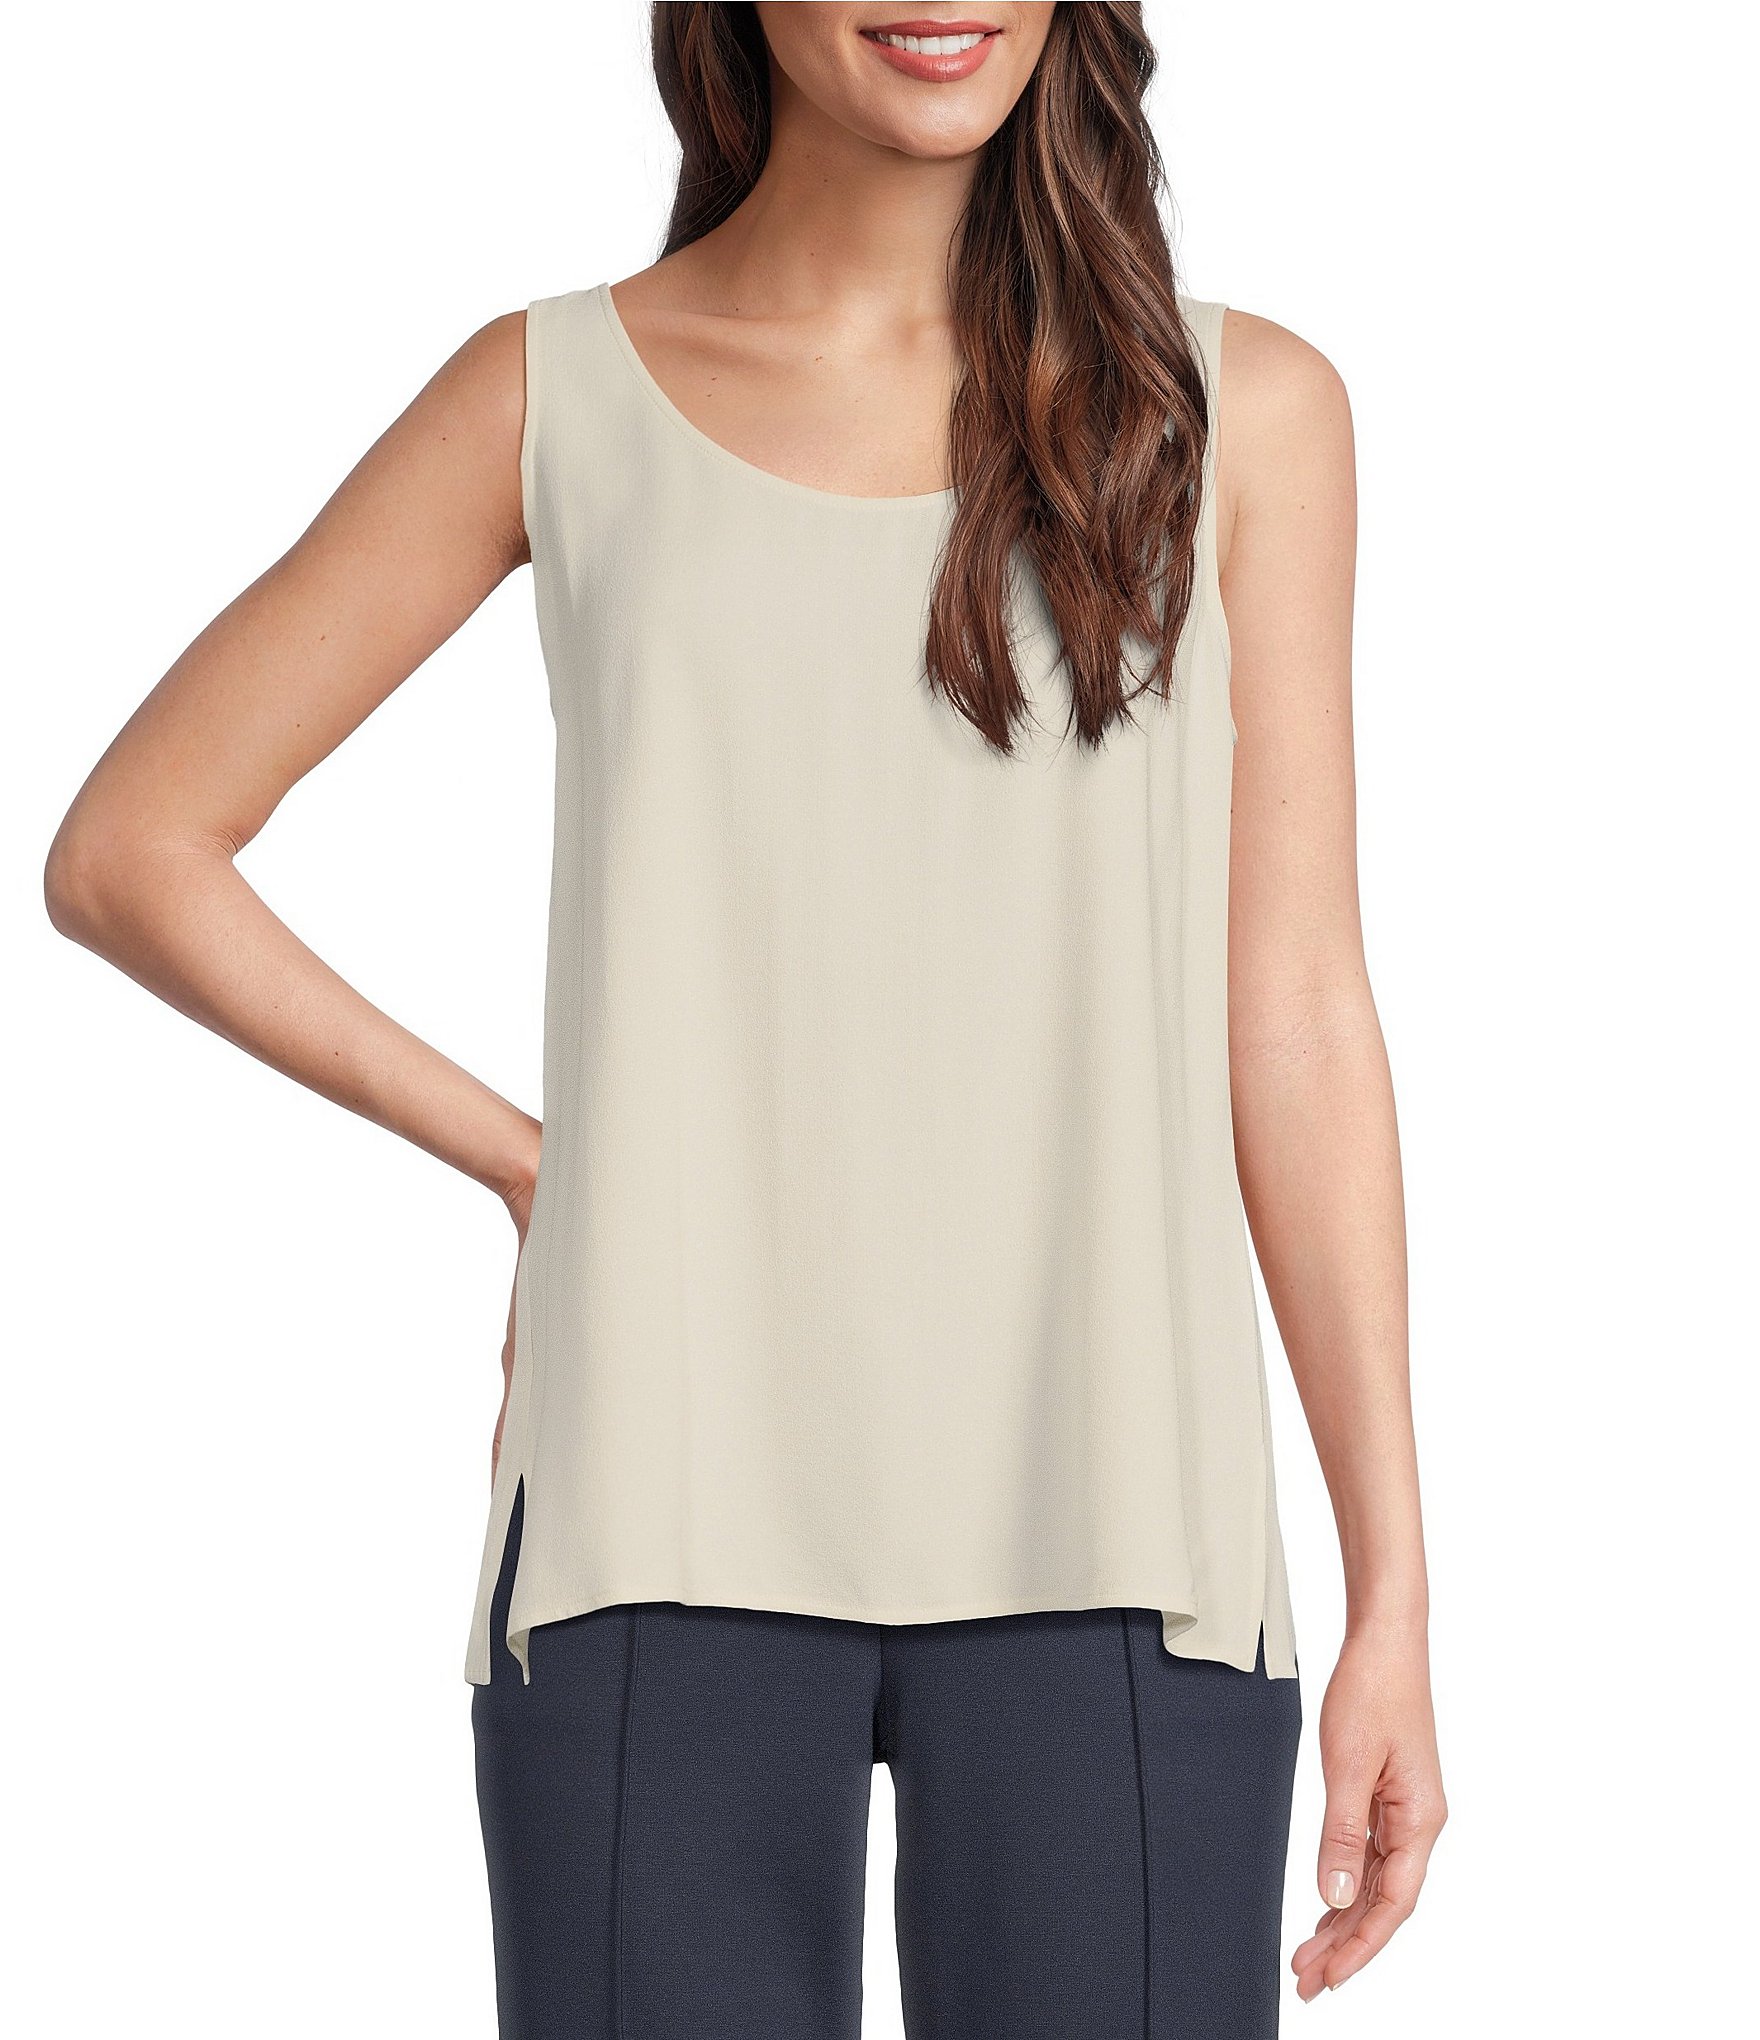 Eileen Fisher Tank Tops - Women - 23 products